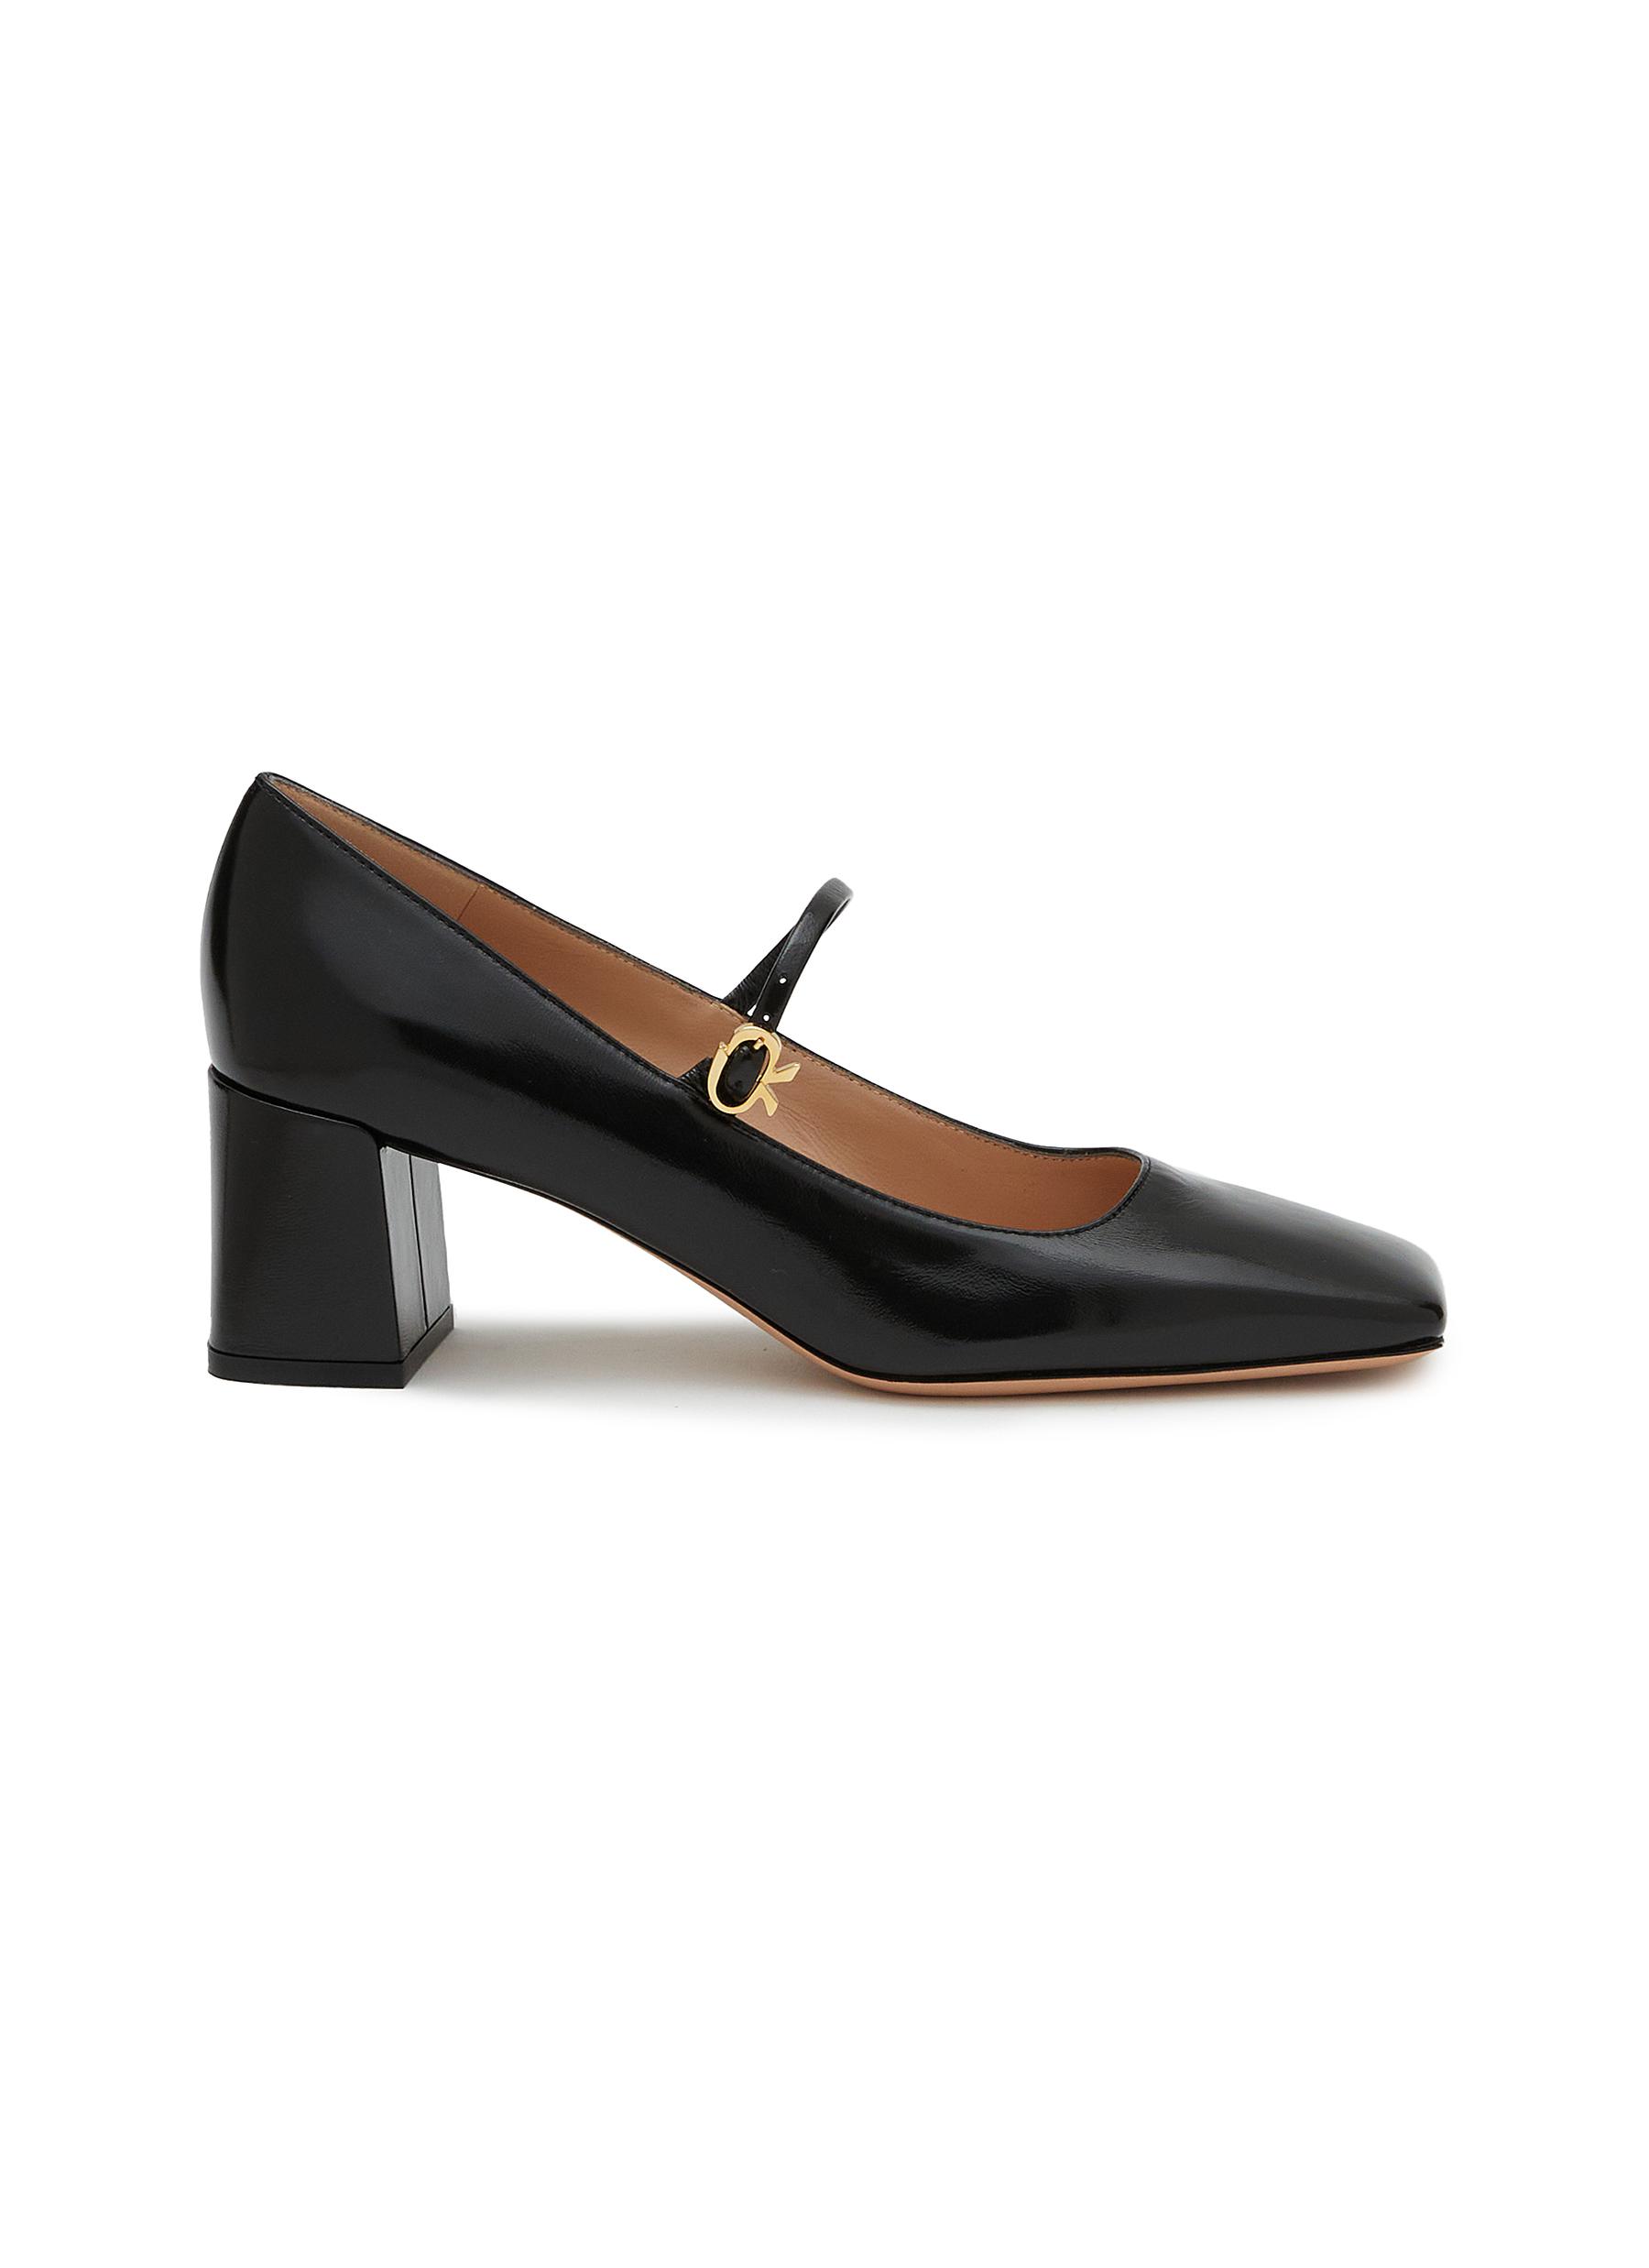 Black Patent Buckled Mary Jane Pumps - CHARLES & KEITH US